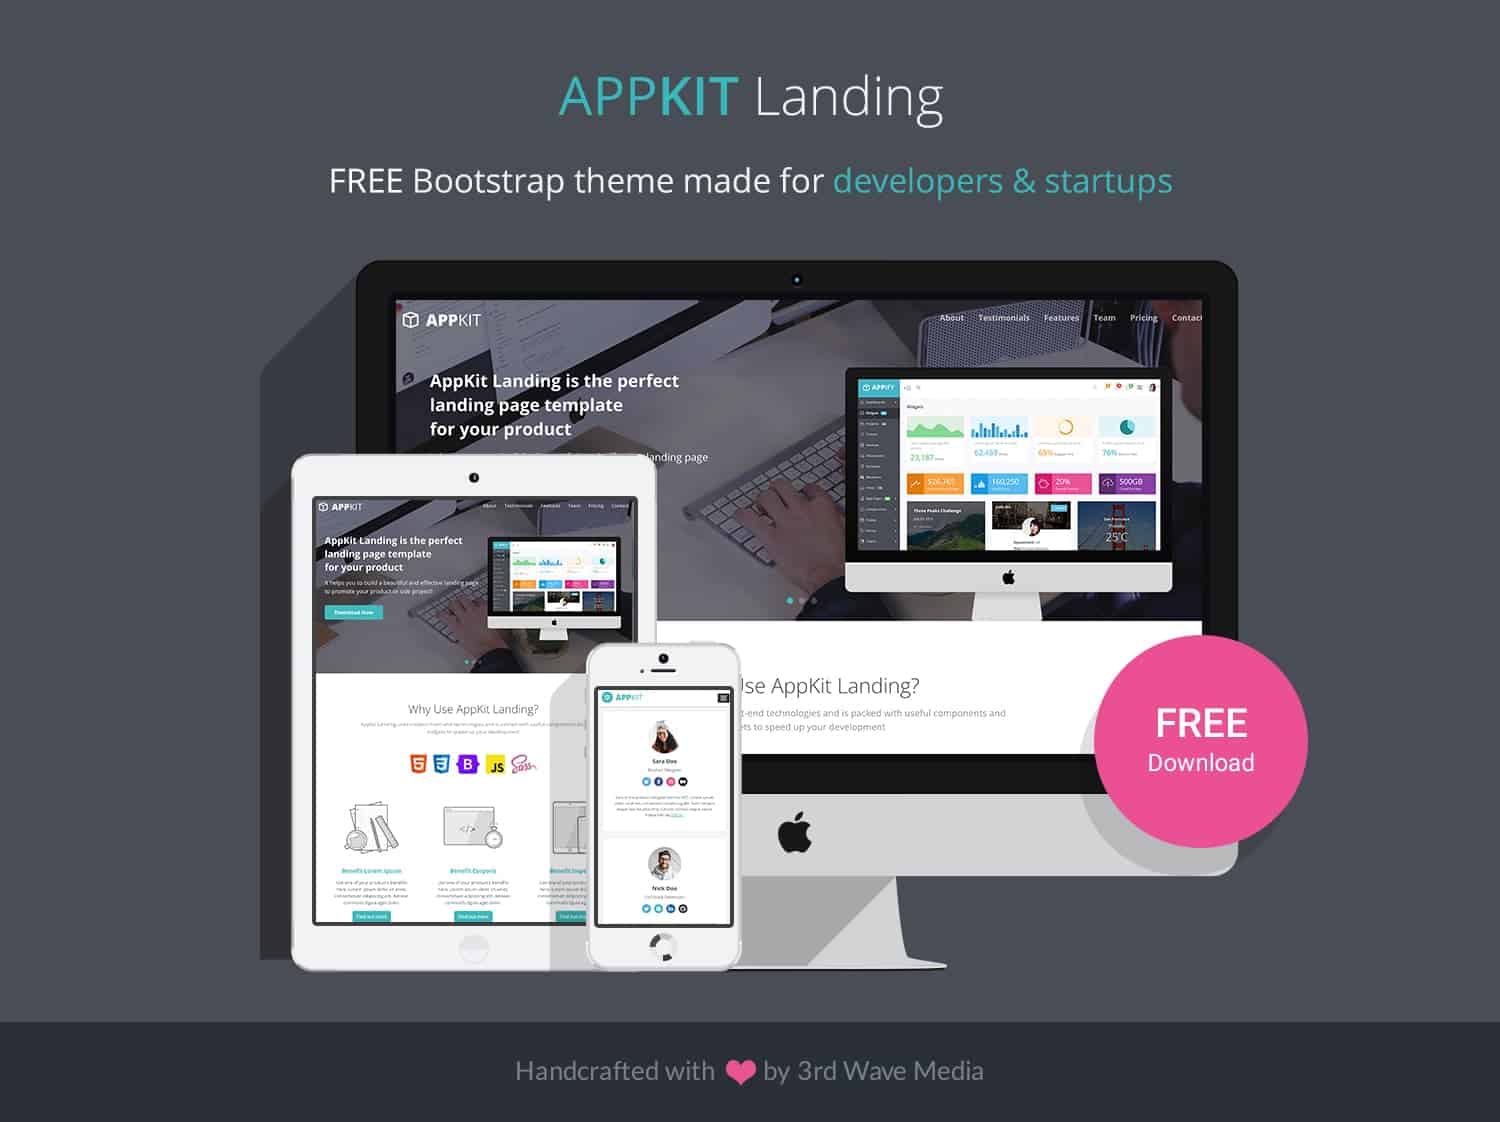 Free Bootstrap Theme for Developers and Startups